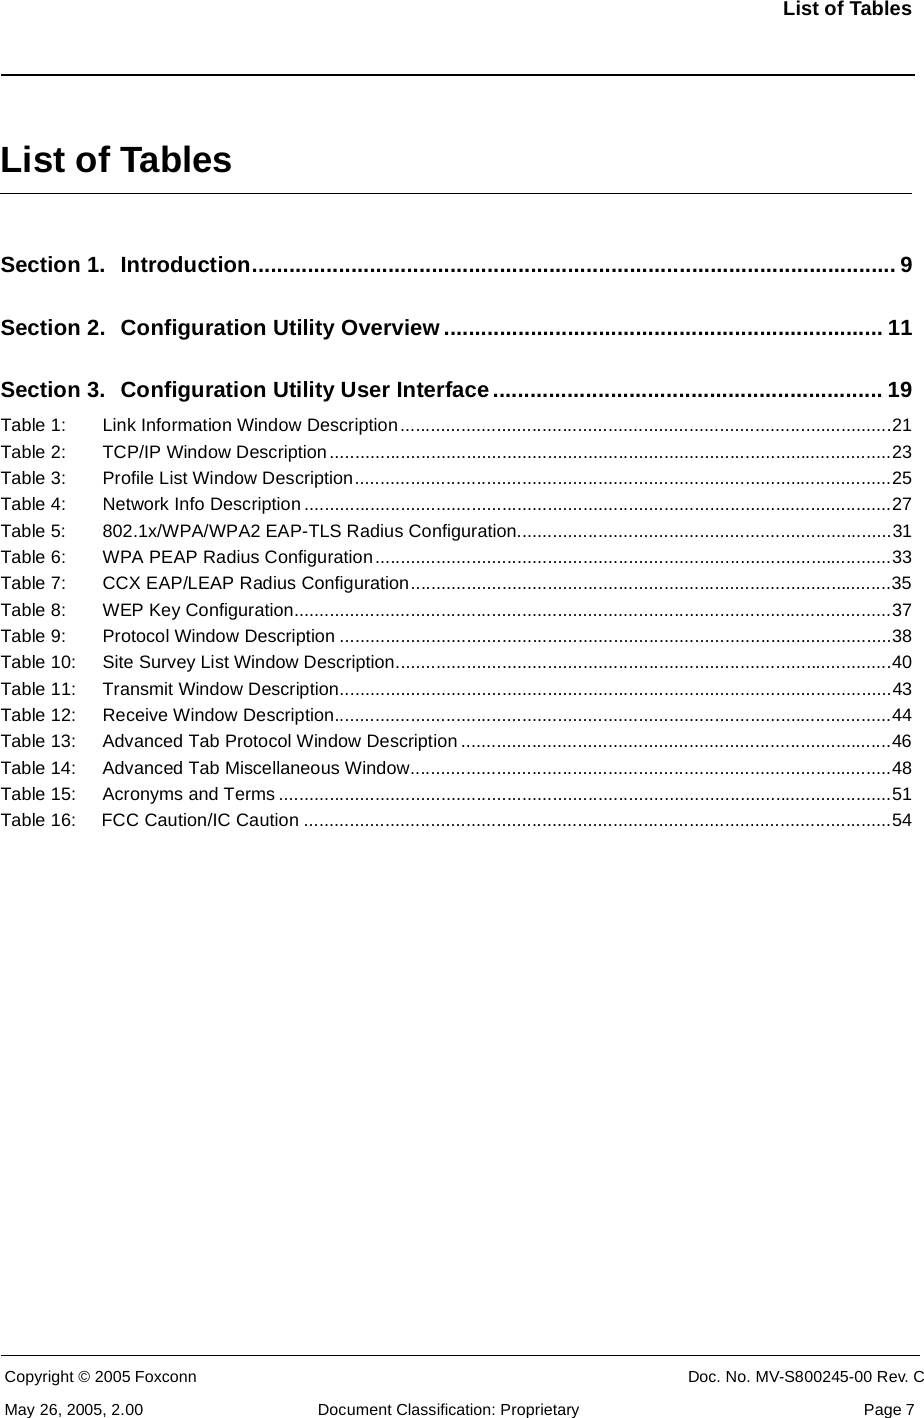 List of TablesCopyright © 2005 Foxconn CONFIDENTIAL Doc. No. MV-S800245-00 Rev. CMay 26, 2005, 2.00 Document Classification: Proprietary  Page 7List of TablesSection 1. Introduction........................................................................................................ 9Section 2. Configuration Utility Overview ....................................................................... 11Section 3. Configuration Utility User Interface............................................................... 19Table 1: Link Information Window Description.................................................................................................21Table 2: TCP/IP Window Description...............................................................................................................23Table 3: Profile List Window Description..........................................................................................................25Table 4: Network Info Description ....................................................................................................................27Table 5: 802.1x/WPA/WPA2 EAP-TLS Radius Configuration..........................................................................31Table 6: WPA PEAP Radius Configuration......................................................................................................33Table 7: CCX EAP/LEAP Radius Configuration...............................................................................................35Table 8: WEP Key Configuration......................................................................................................................37Table 9: Protocol Window Description .............................................................................................................38Table 10: Site Survey List Window Description..................................................................................................40Table 11: Transmit Window Description.............................................................................................................43Table 12: Receive Window Description..............................................................................................................44Table 13: Advanced Tab Protocol Window Description .....................................................................................46Table 14: Advanced Tab Miscellaneous Window...............................................................................................48Table 15: Acronyms and Terms .........................................................................................................................51Table 16:     FCC Caution/IC Caution ....................................................................................................................54